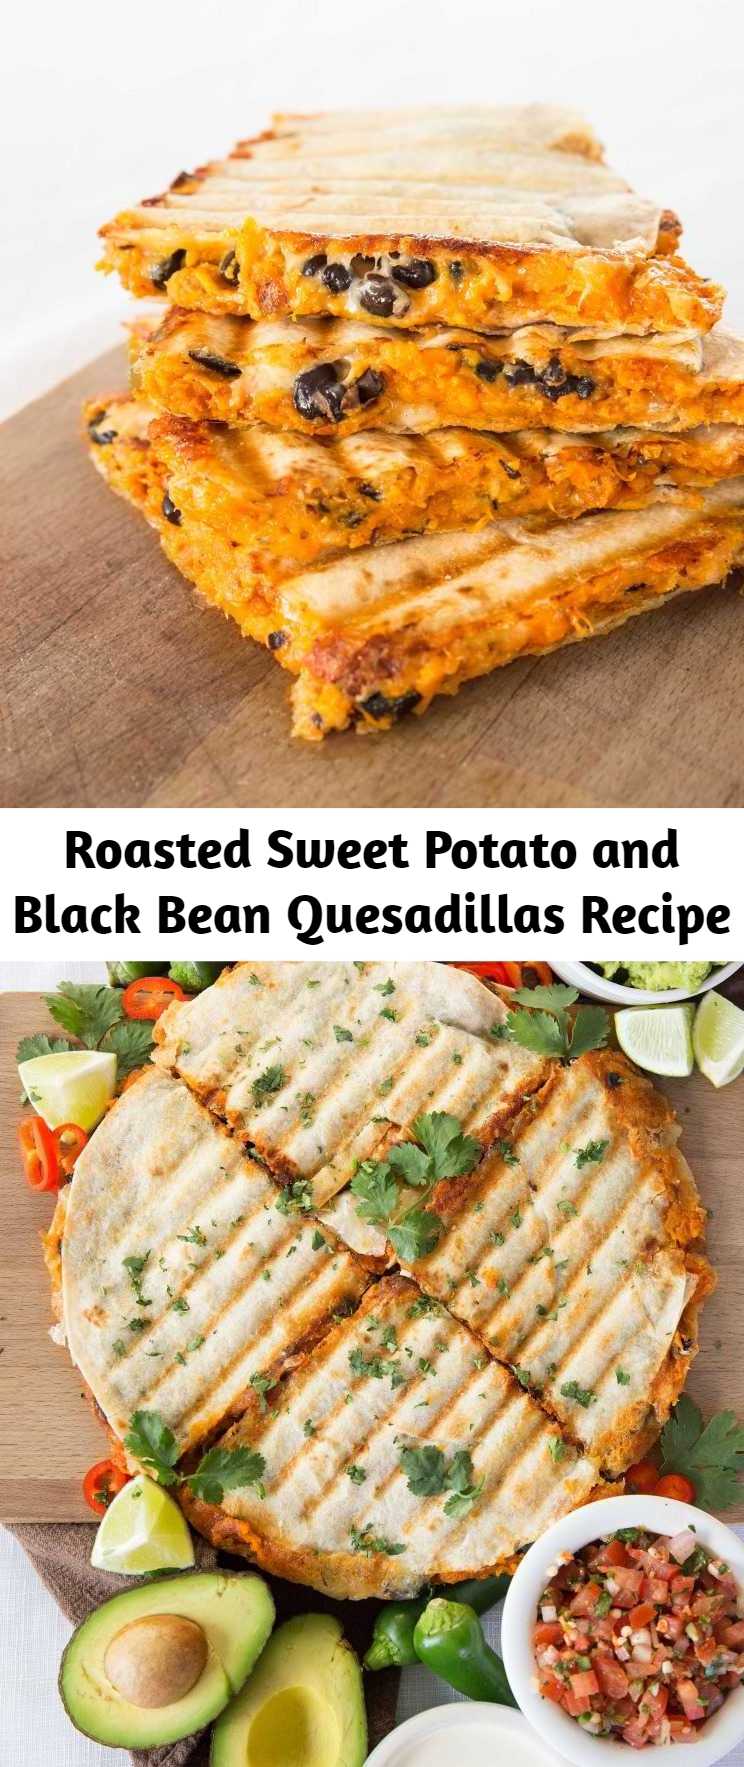 Roasted Sweet Potato and Black Bean Quesadillas Recipe - Roasted Sweet Potato and Black Bean Quesadillas are the best vegetarian quesadillas you'll ever taste. So easy to make and most importantly incredibly delicious and filling! #sweetpotato #quesadillas #vegetarian #vegetarianquesadillas #sweetpotatoquesadillas